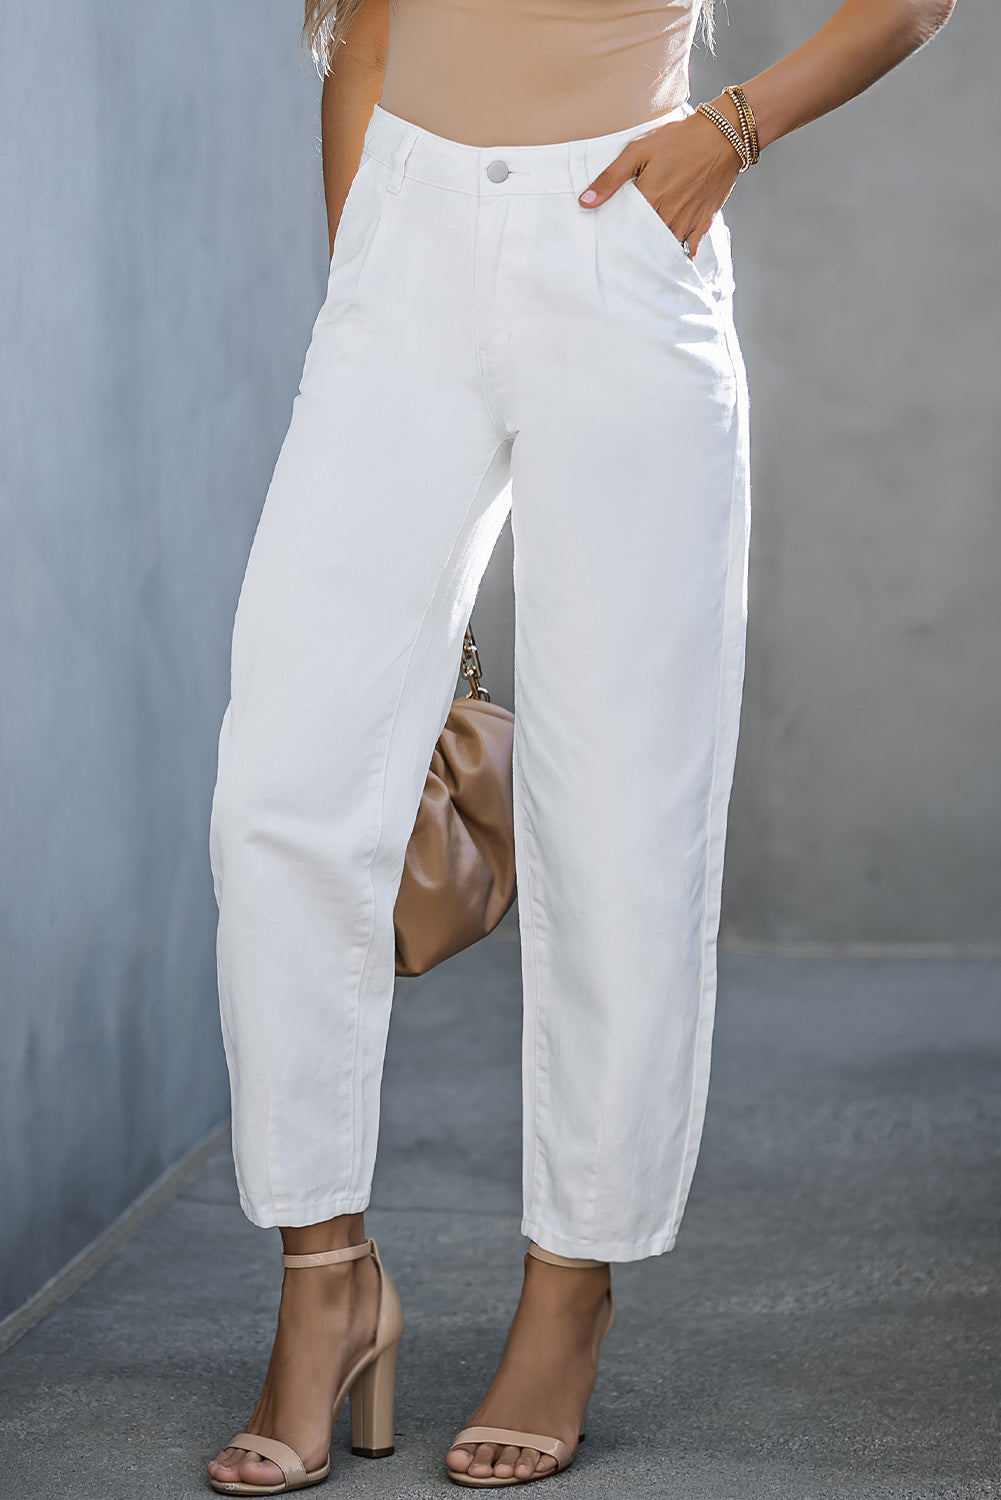 White Solid Casual High Waist Straight Leg Pants - Cowtown Bling N Things